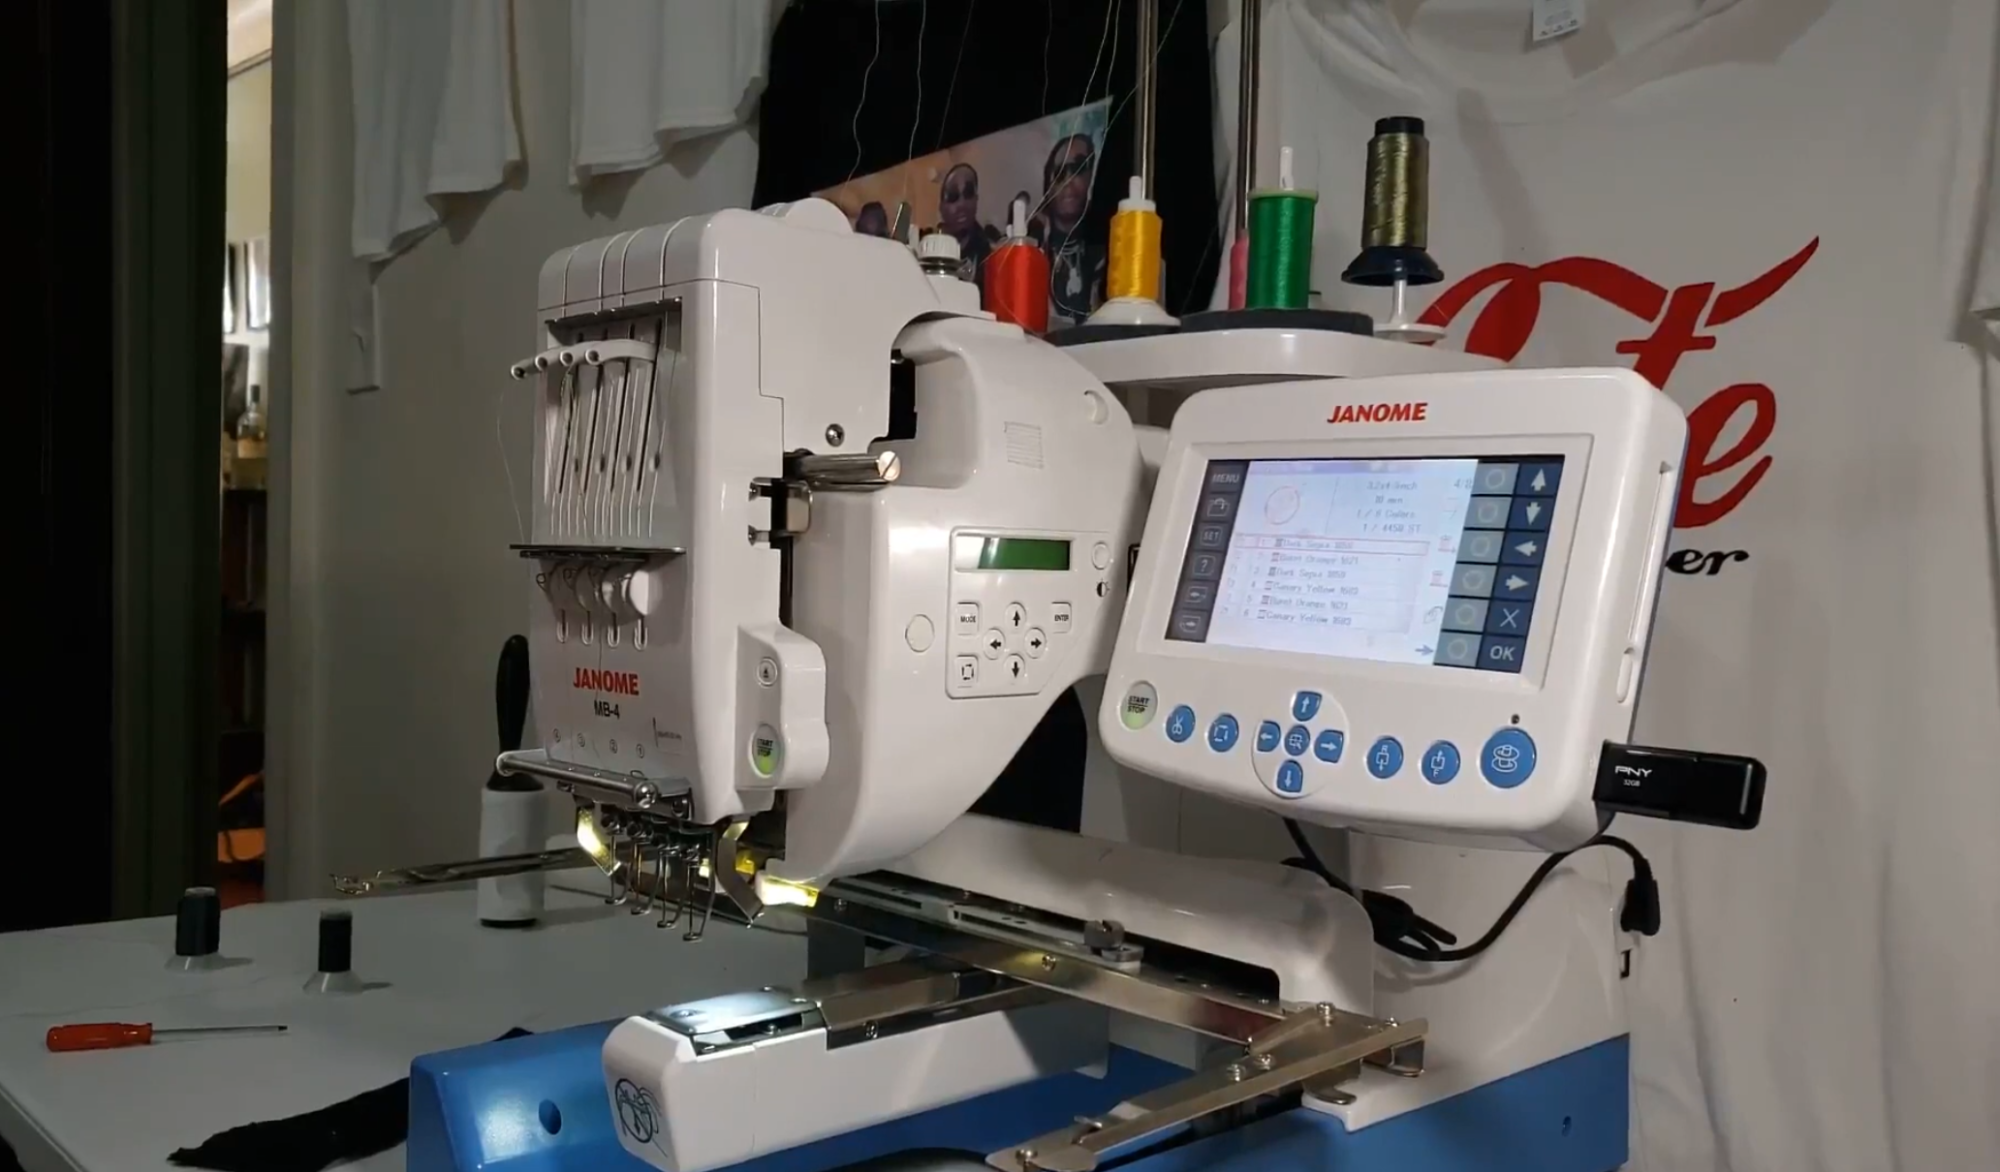 the janome mb4secheapest multi needle embroidery machine on the market